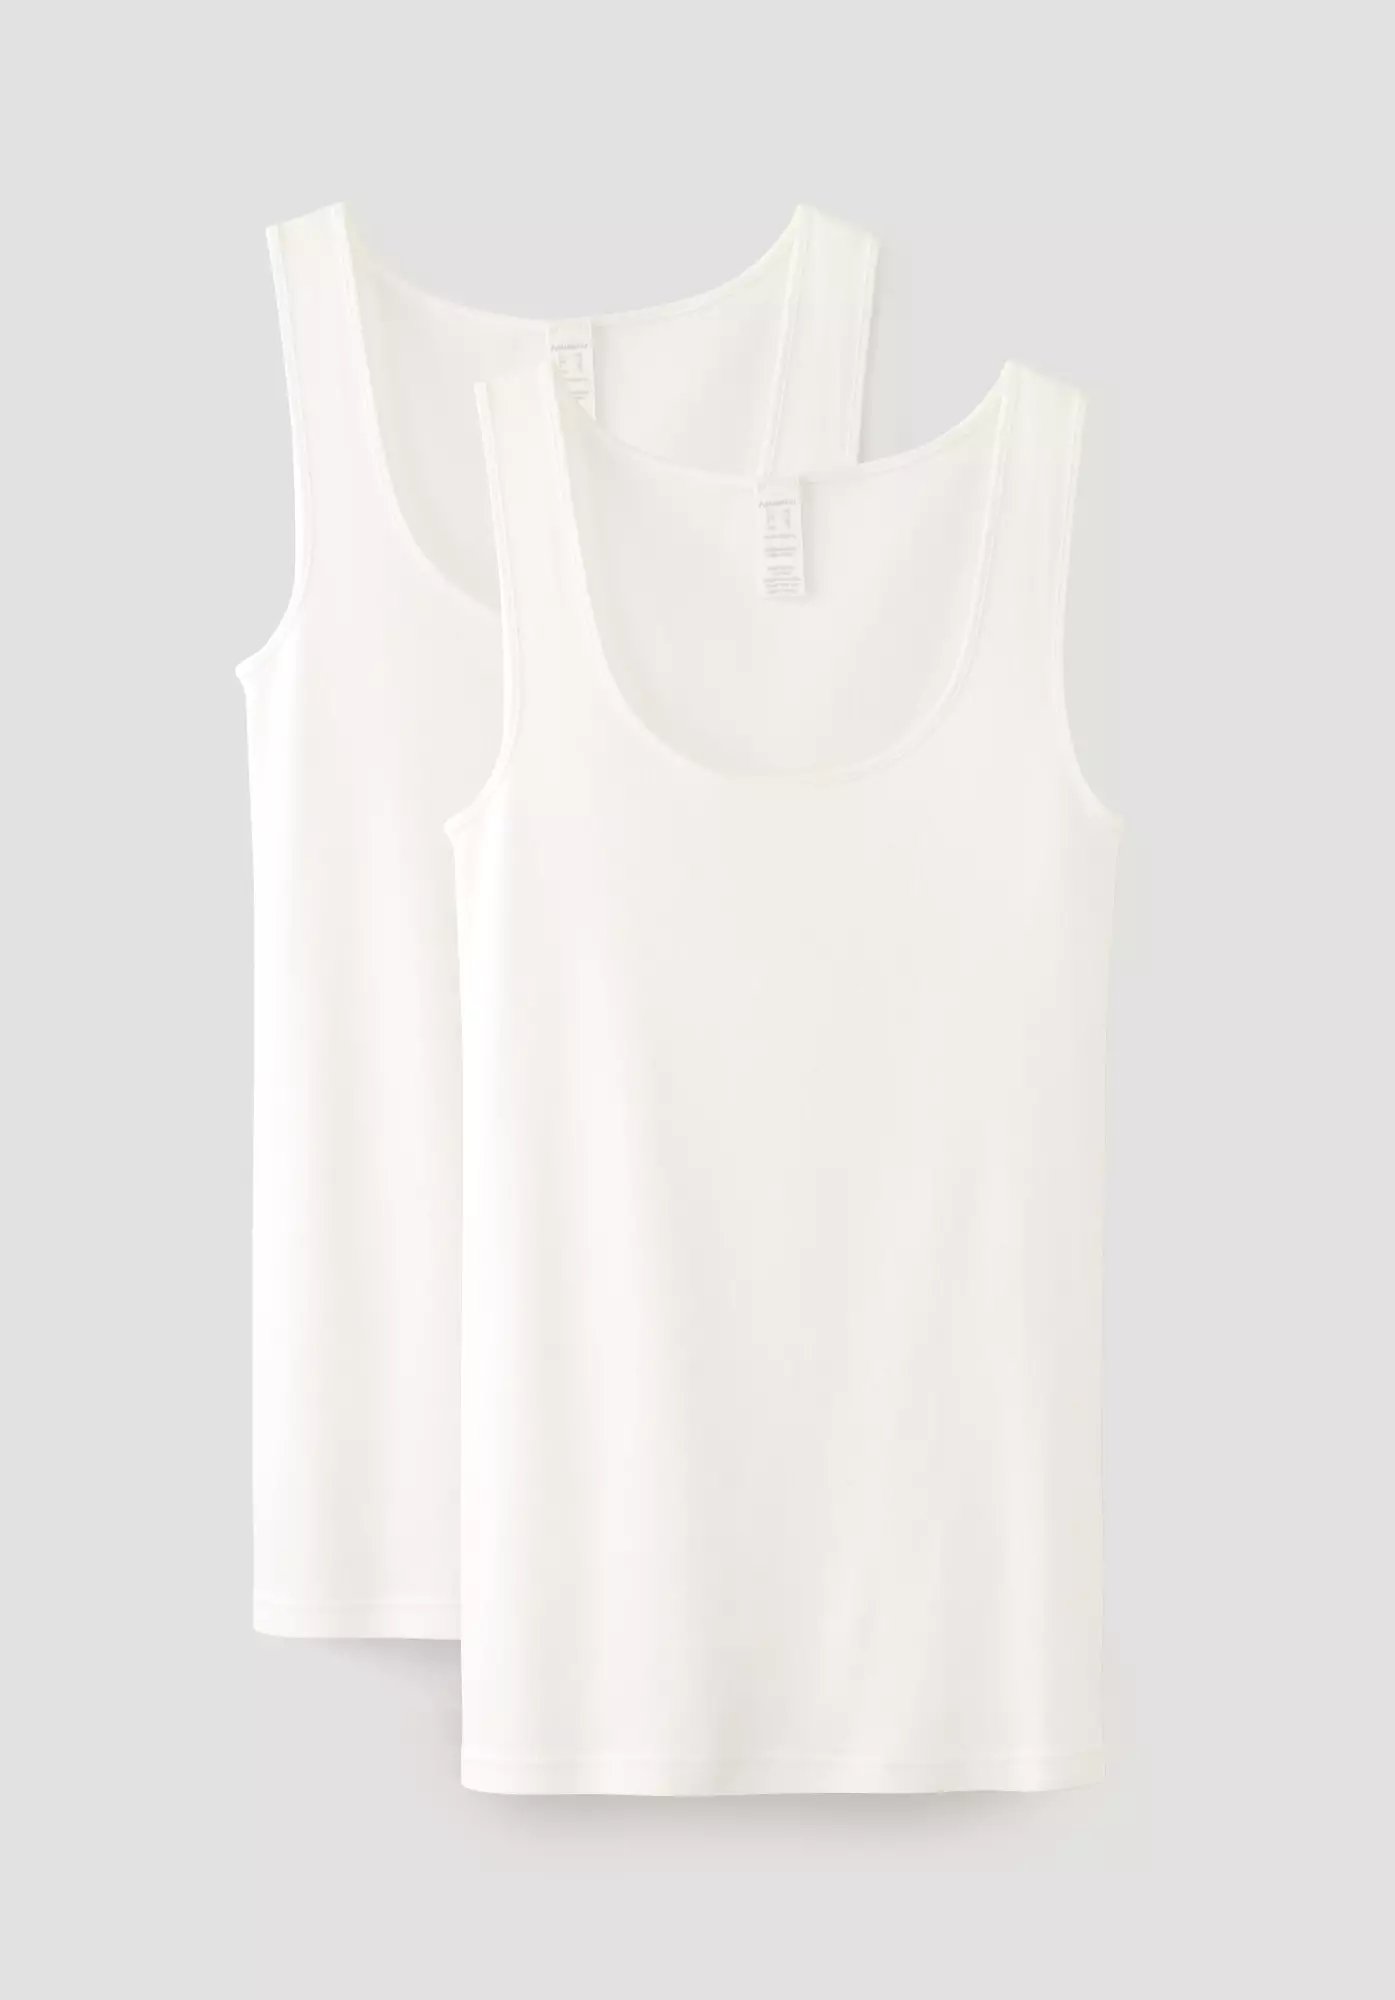 Tank top PureDAILY in a set of 2 made of pure organic cotton - 2